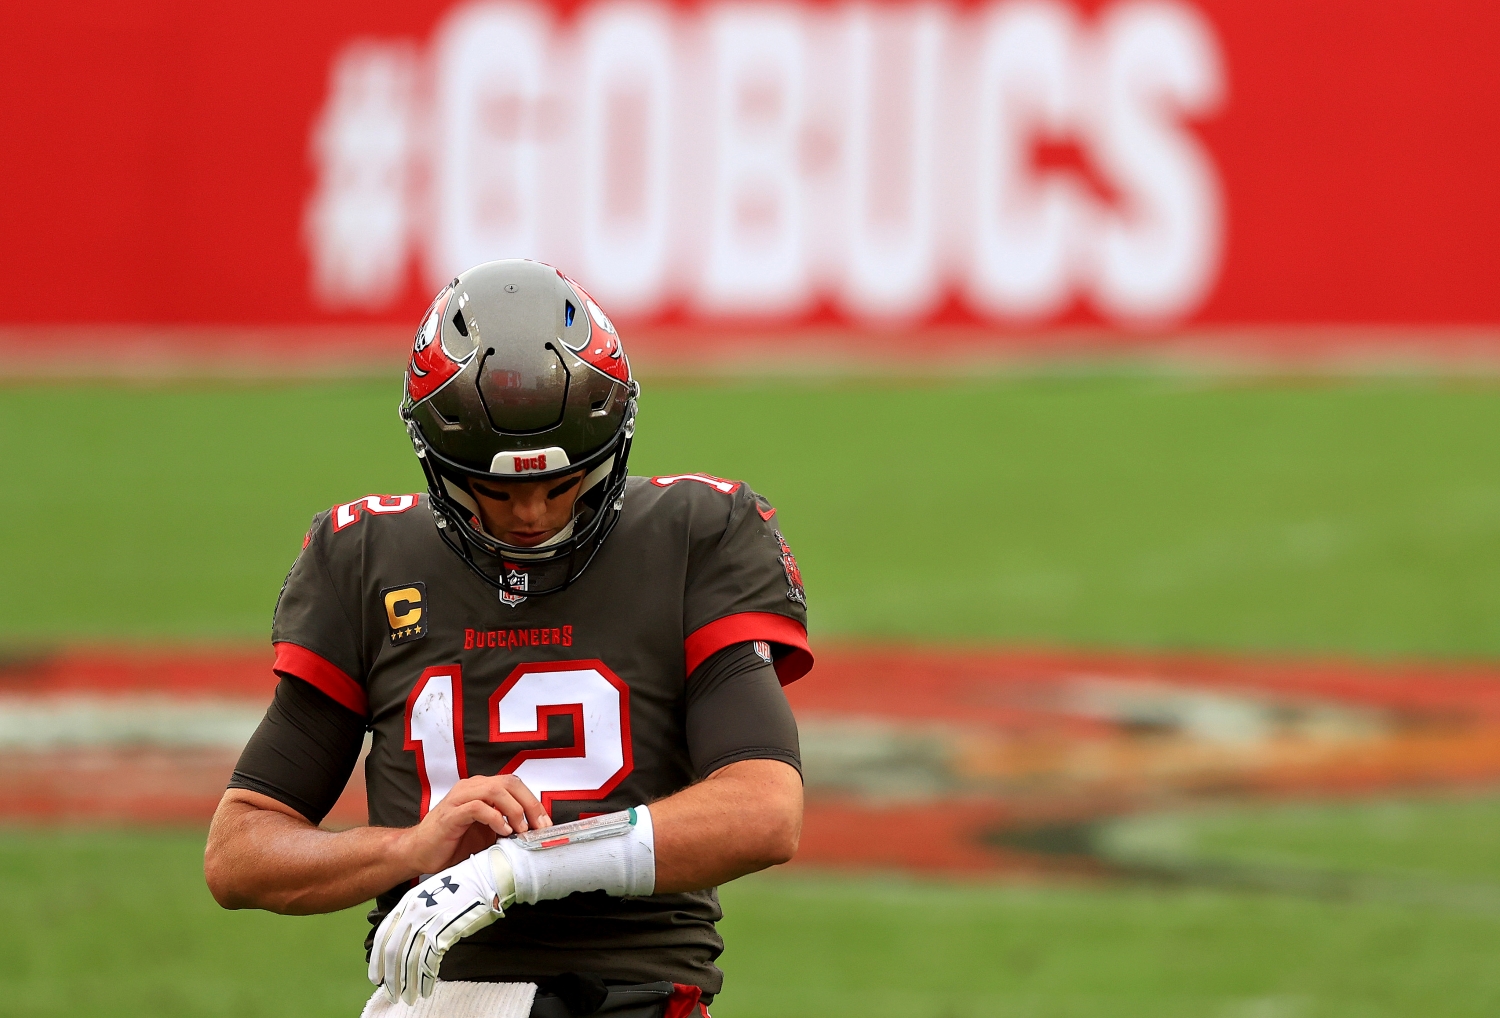 Tampa Bay Buccaneers quarterback Tom Brady looks at his wristband during a game.